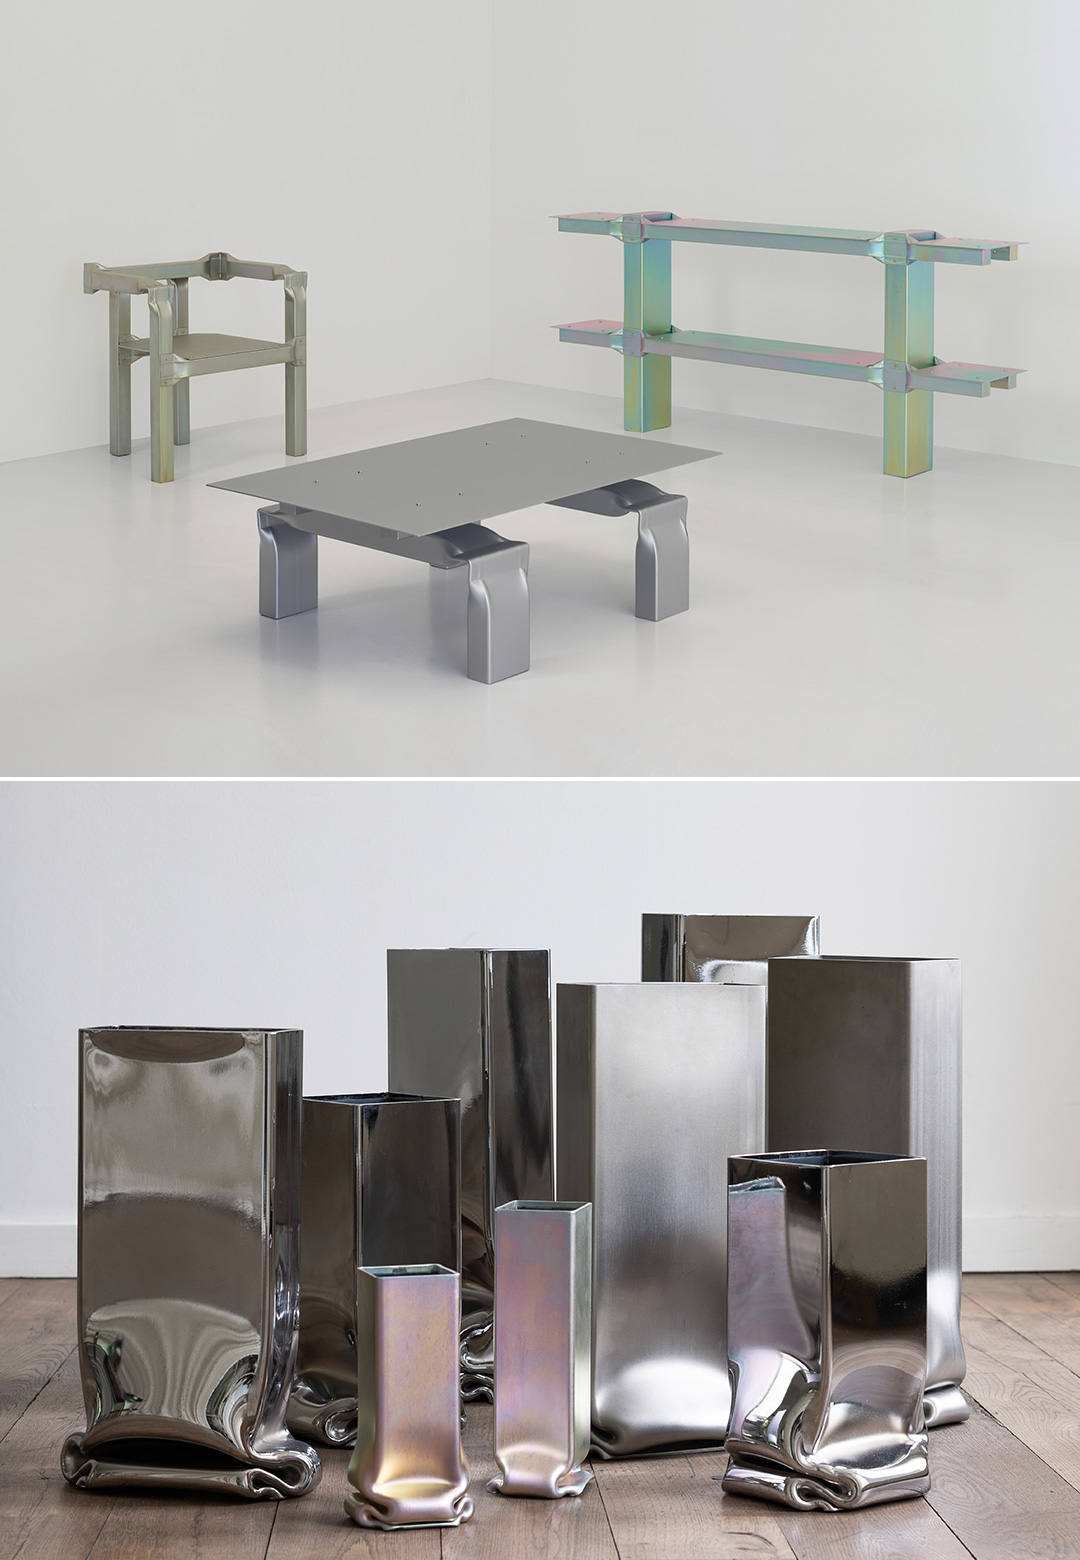 Crafting with constraints, Tim Teven explores steel in his new collection ‘Tube’